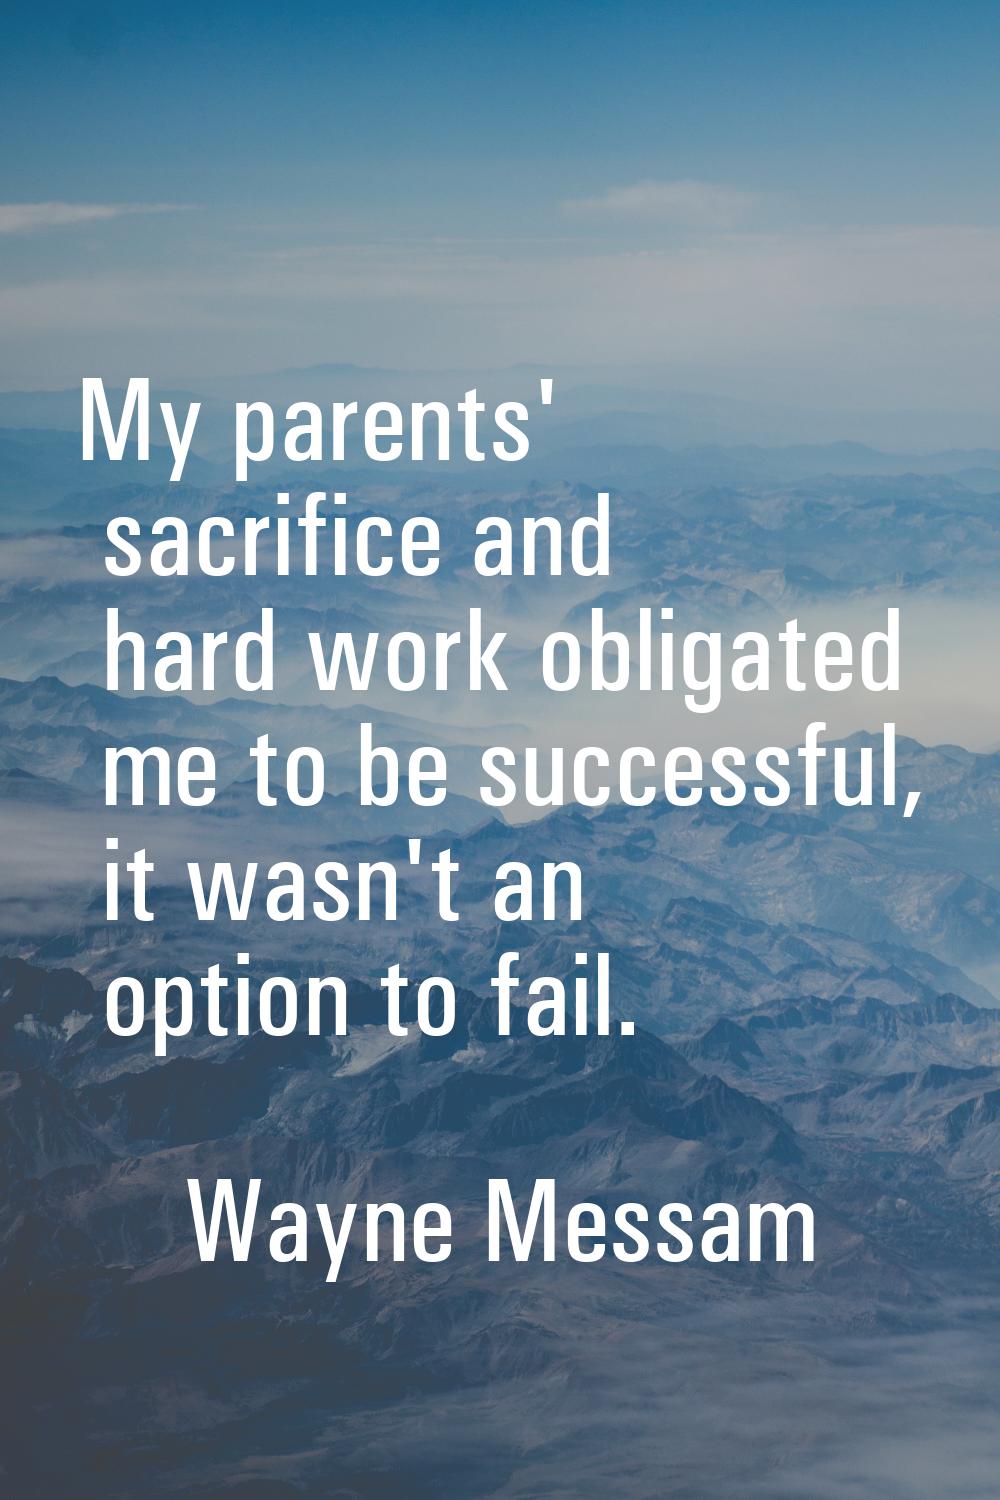 My parents' sacrifice and hard work obligated me to be successful, it wasn't an option to fail.